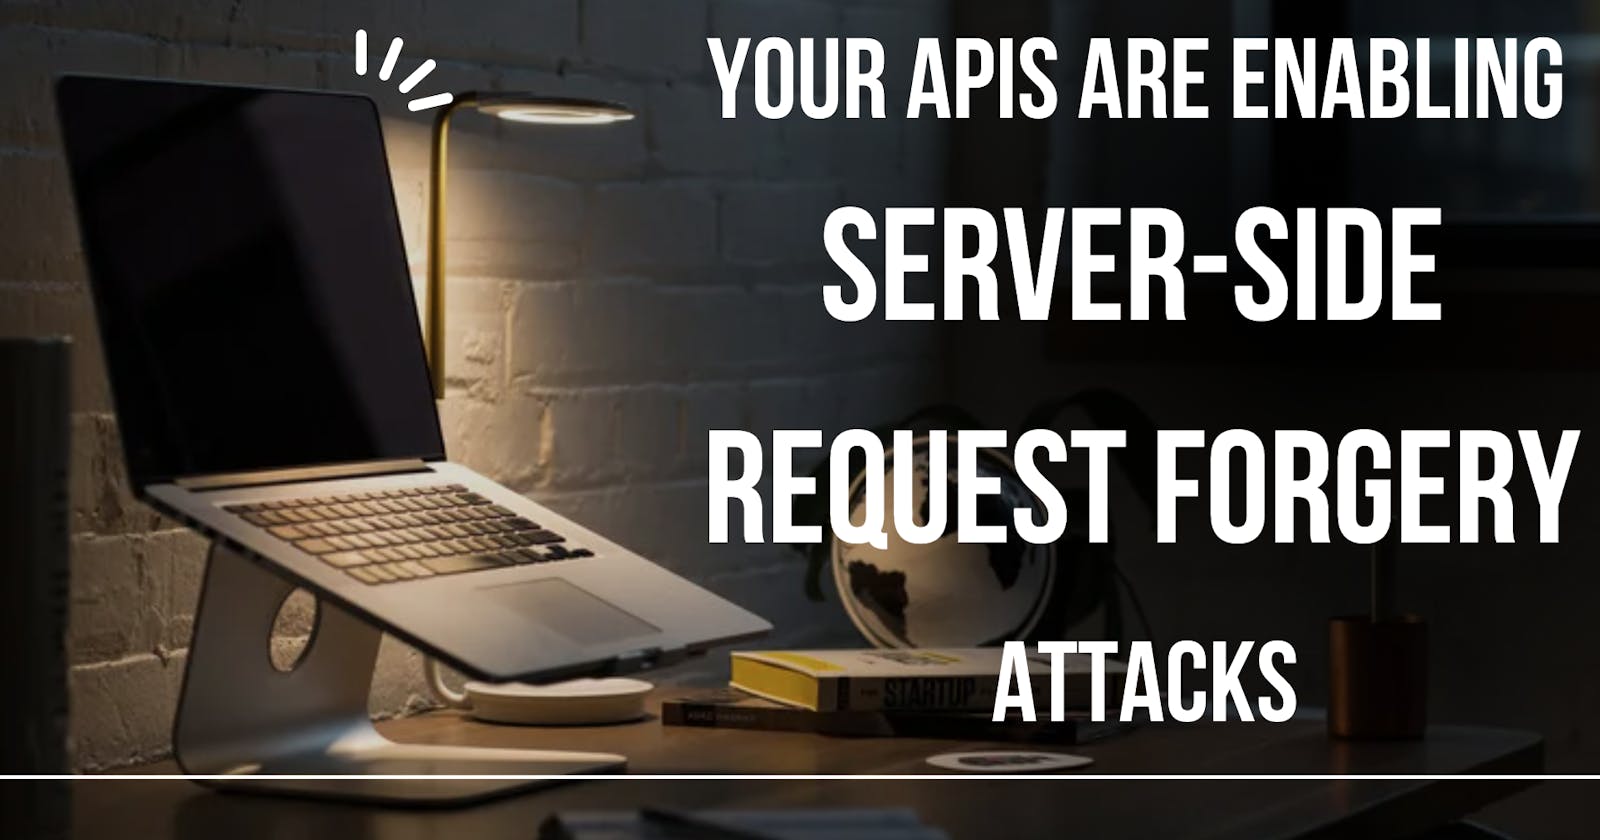 Your APIs are enabling Server-Side Request Forgery (SSRF) attacks